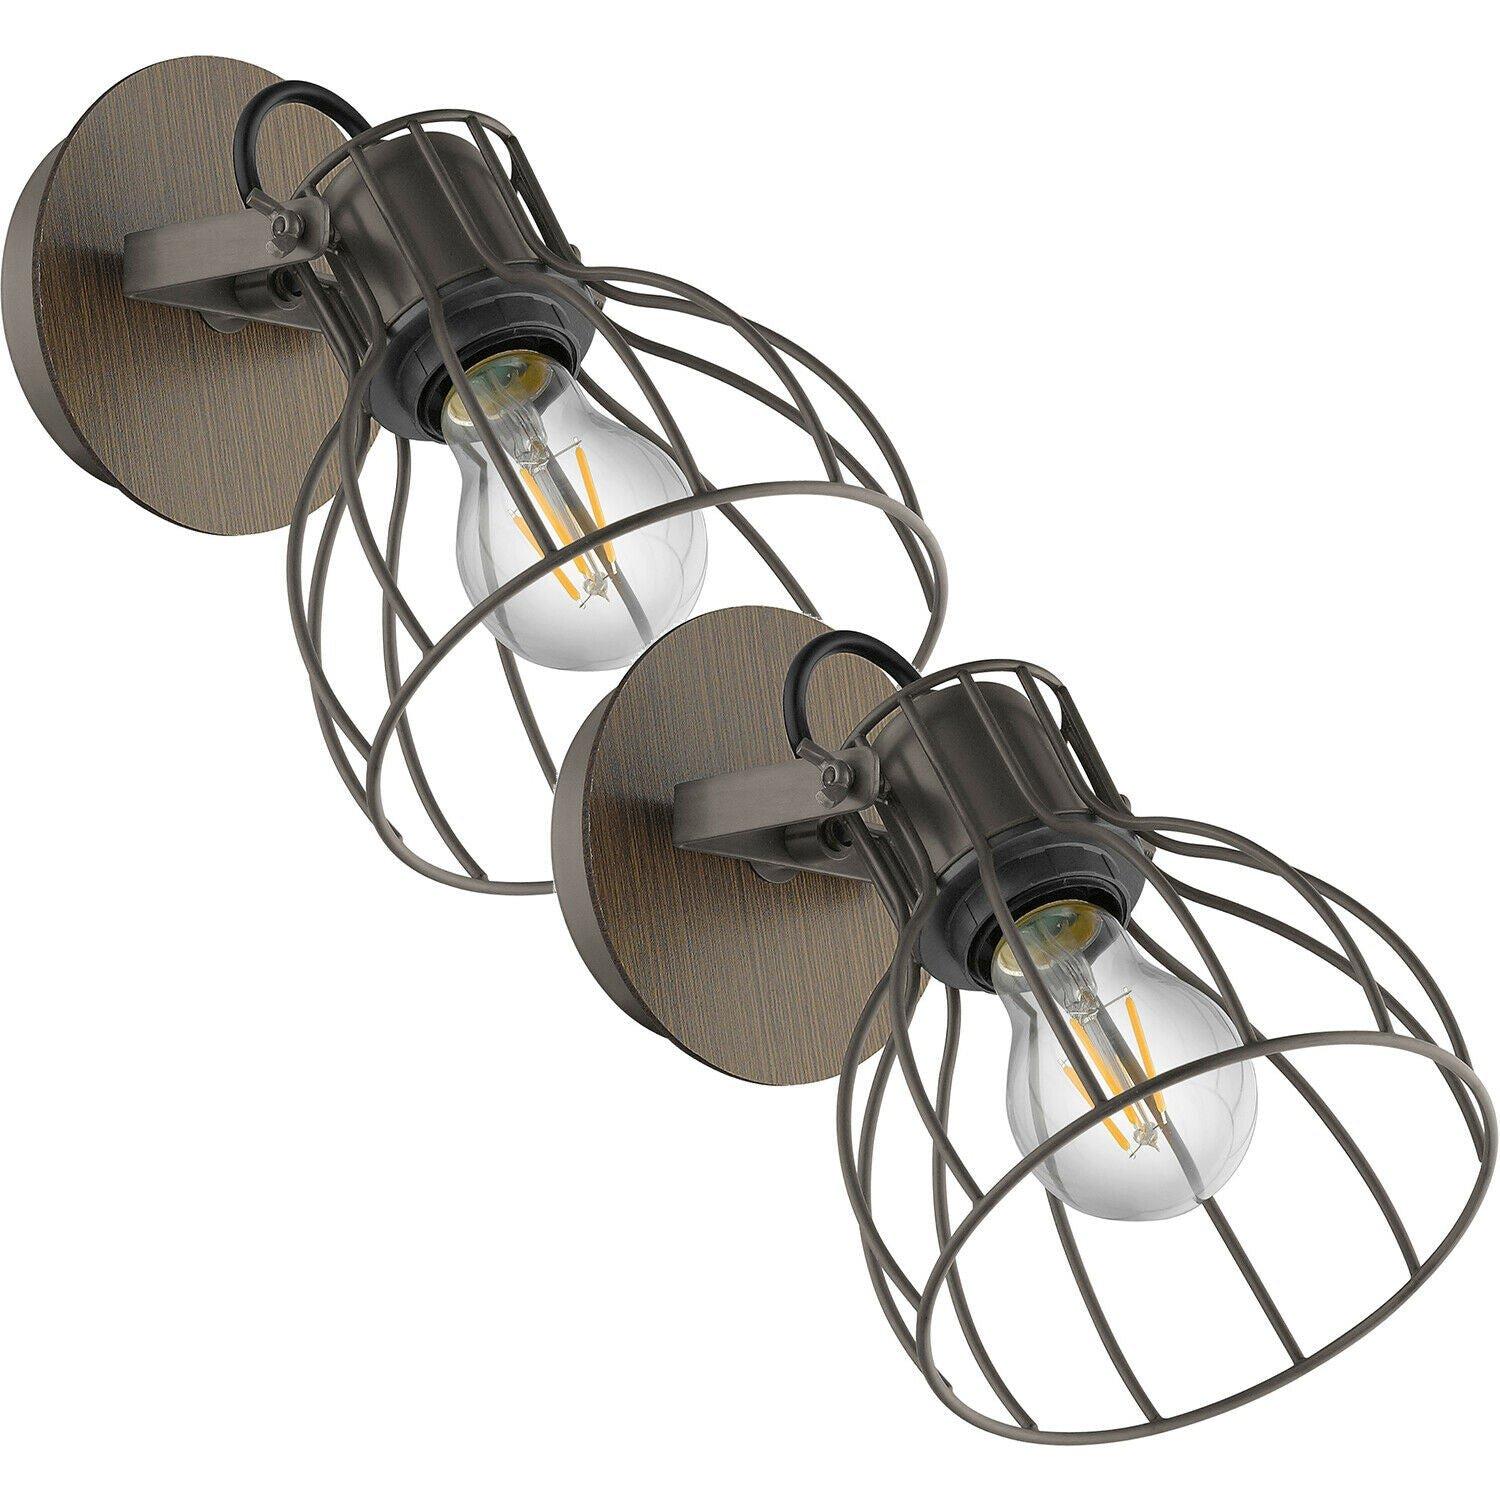 2 PACK Wall Light Colour Brown & Silver Silver Steel Open Cage Shade E27 1x40W